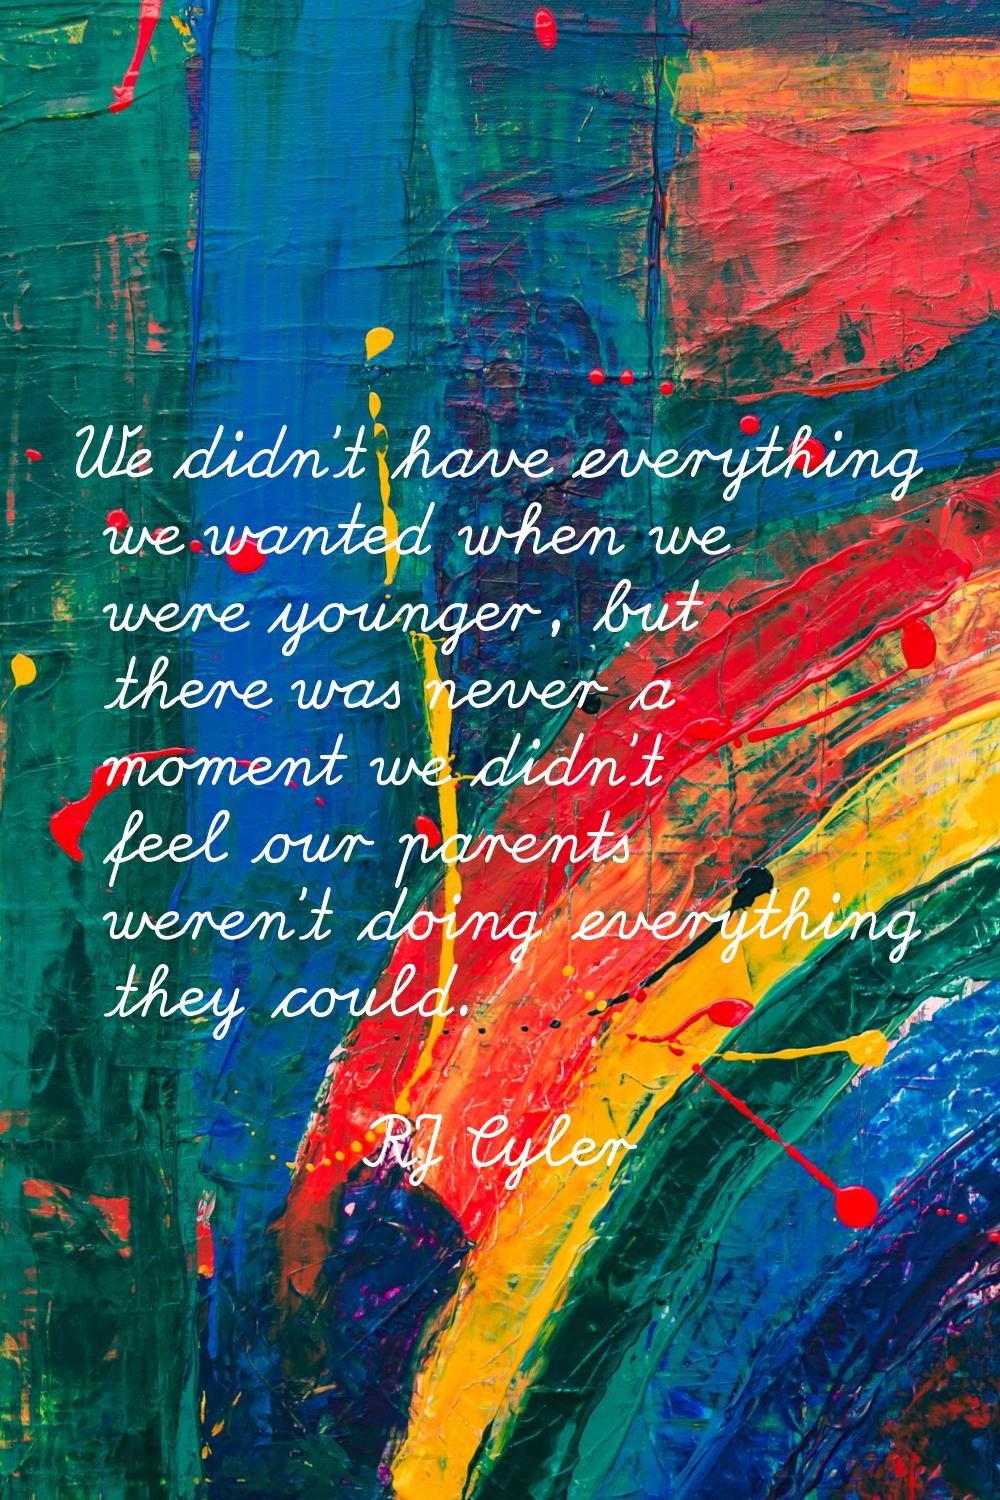 We didn't have everything we wanted when we were younger, but there was never a moment we didn't fe